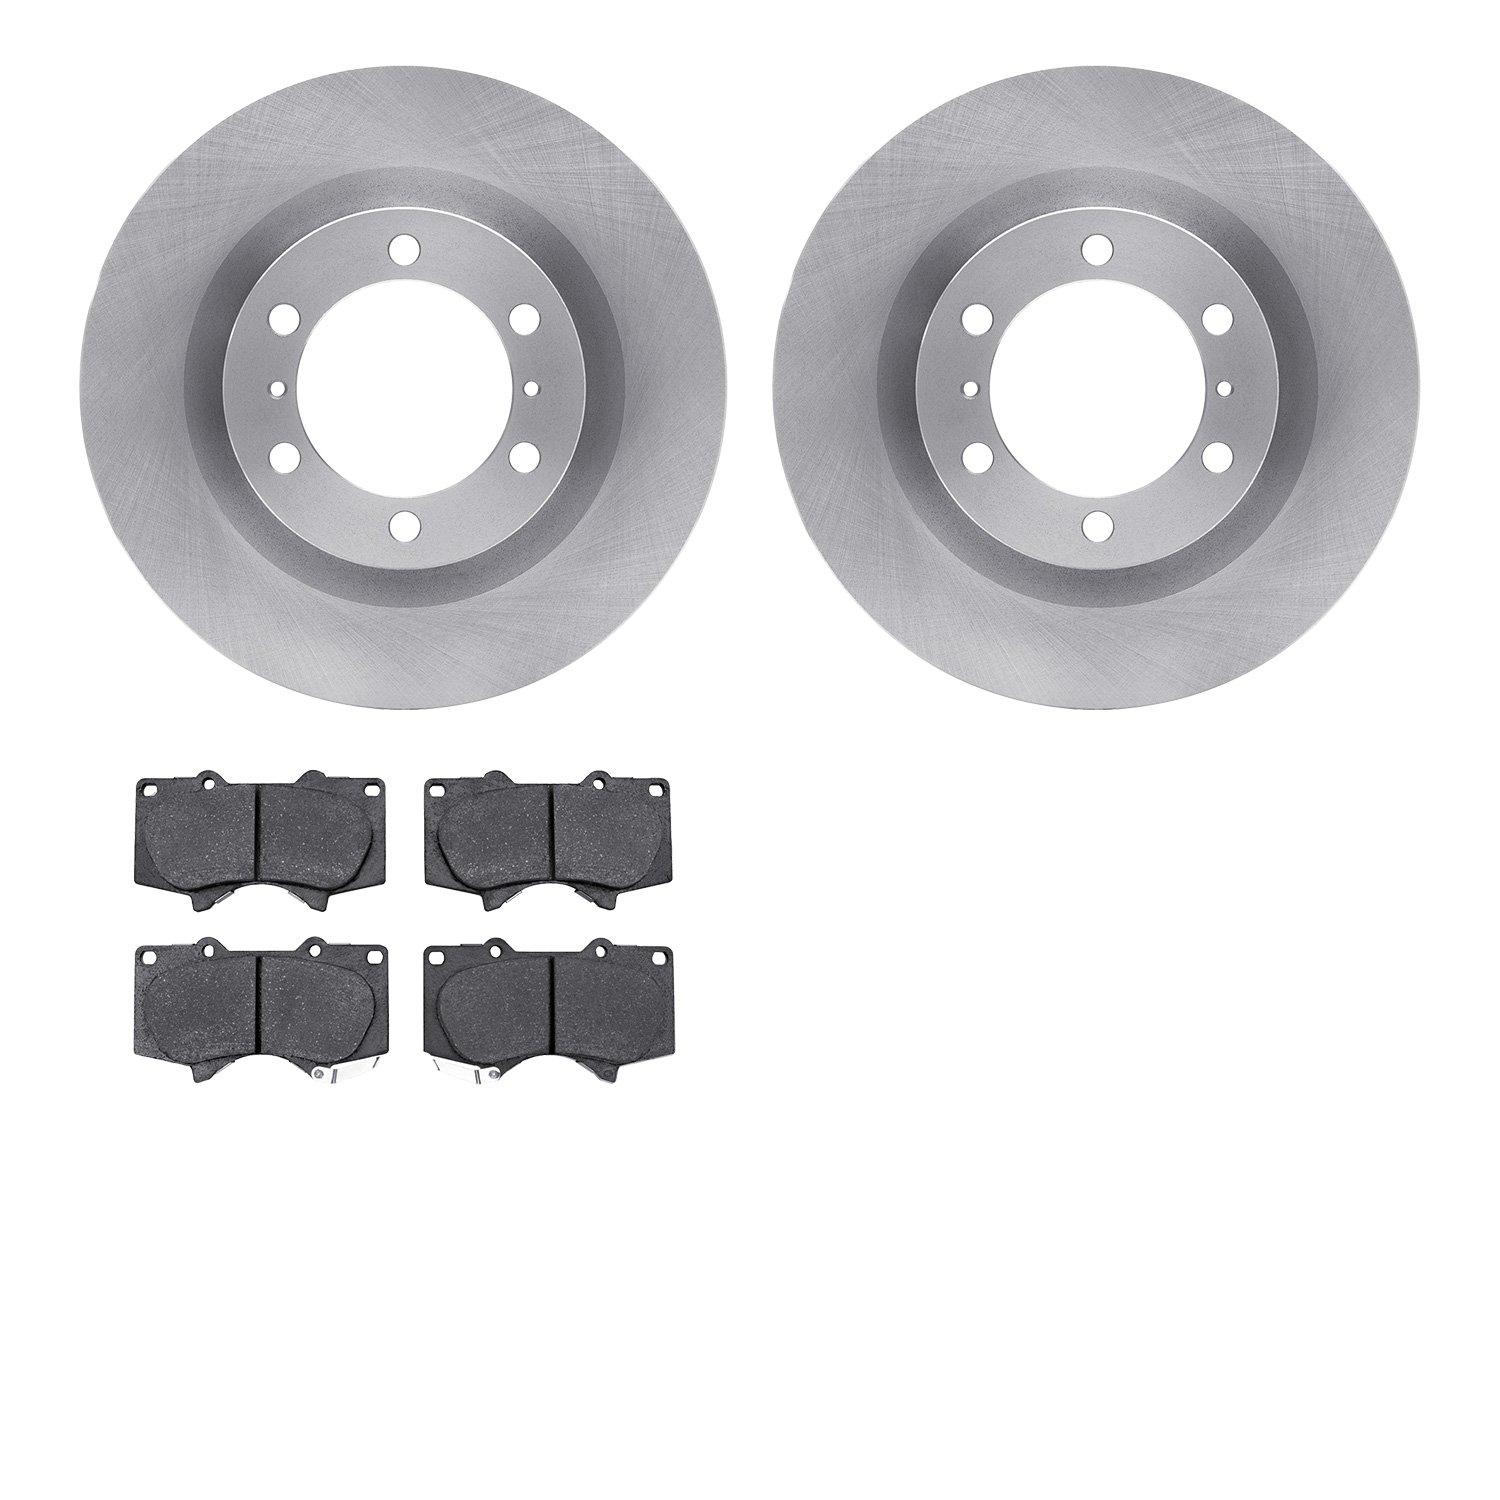 6302-76148 Brake Rotors with 3000-Series Ceramic Brake Pads Kit, Fits Select Lexus/Toyota/Scion, Position: Front